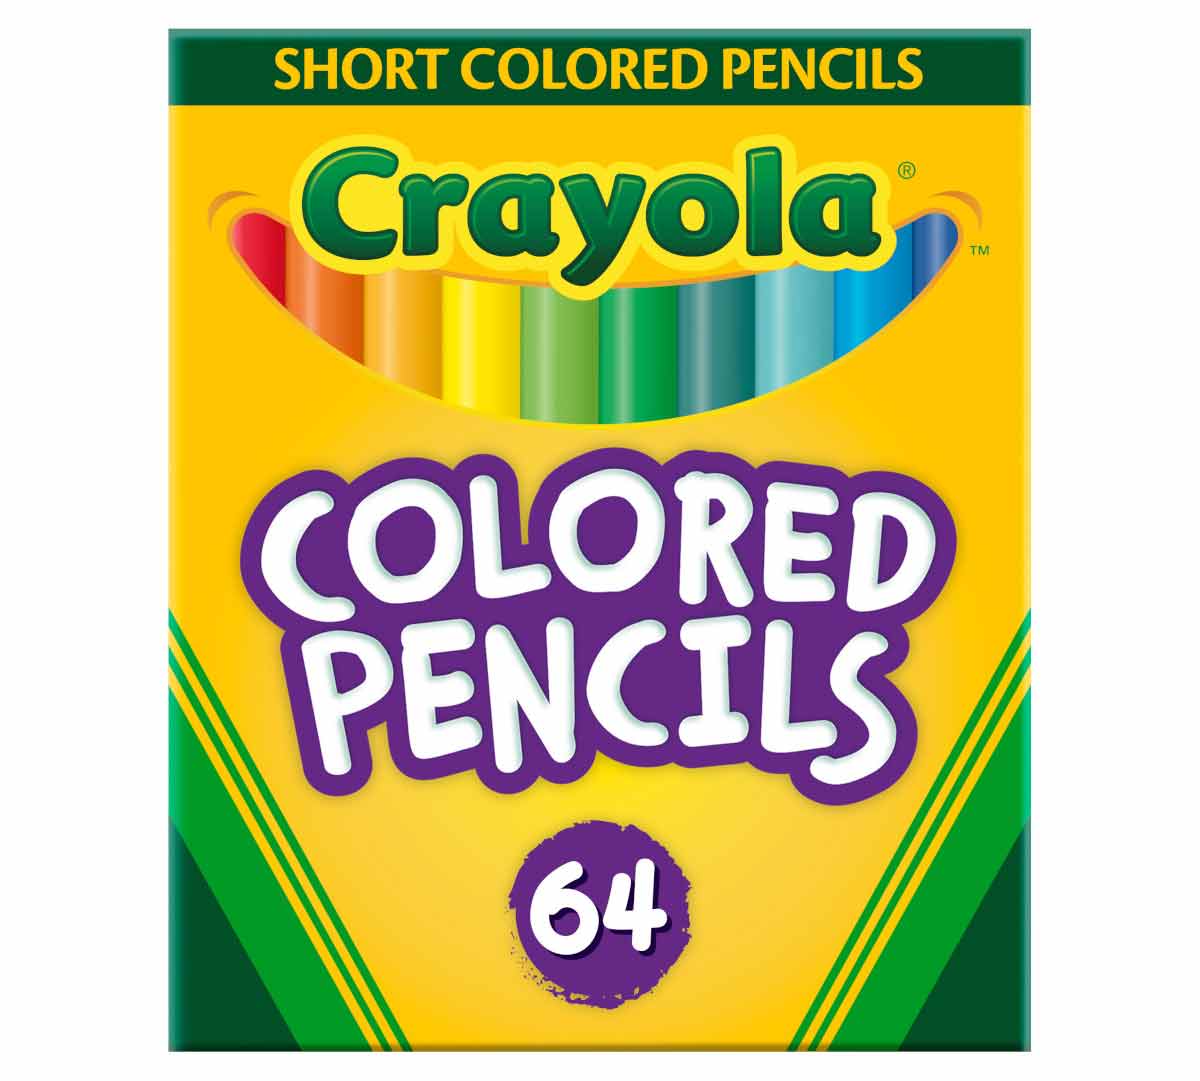  Crayola Mini Colored Pencils (Colors may vary), Coloring  Supplies for Kids, 64 Count, Gift : Toys & Games